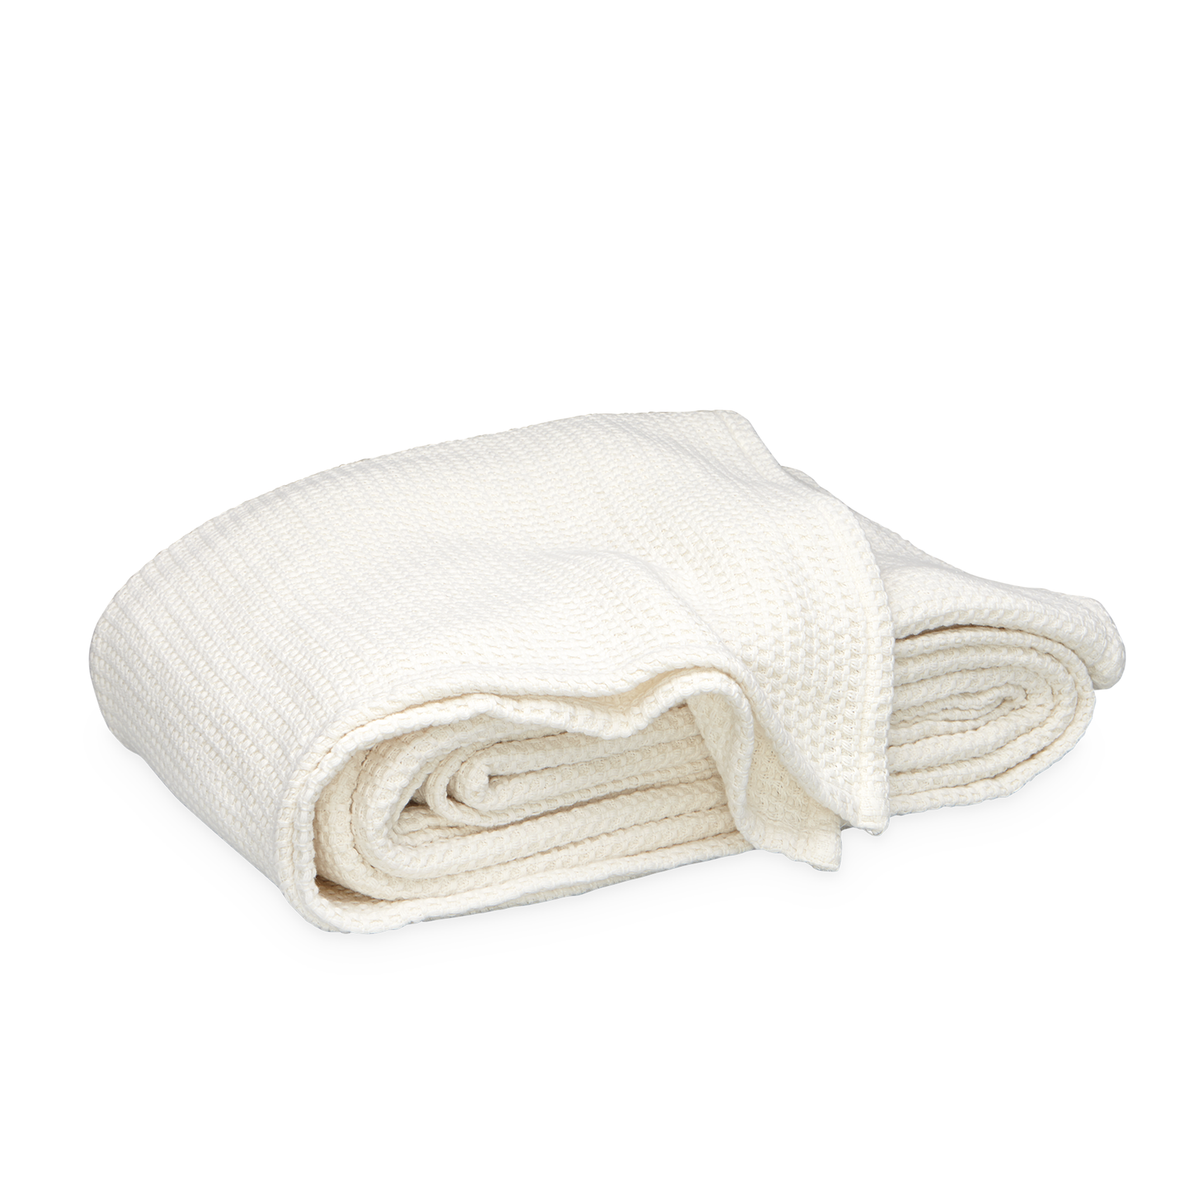 Clear Image of Matouk Chatham Blanket in Ivory Color